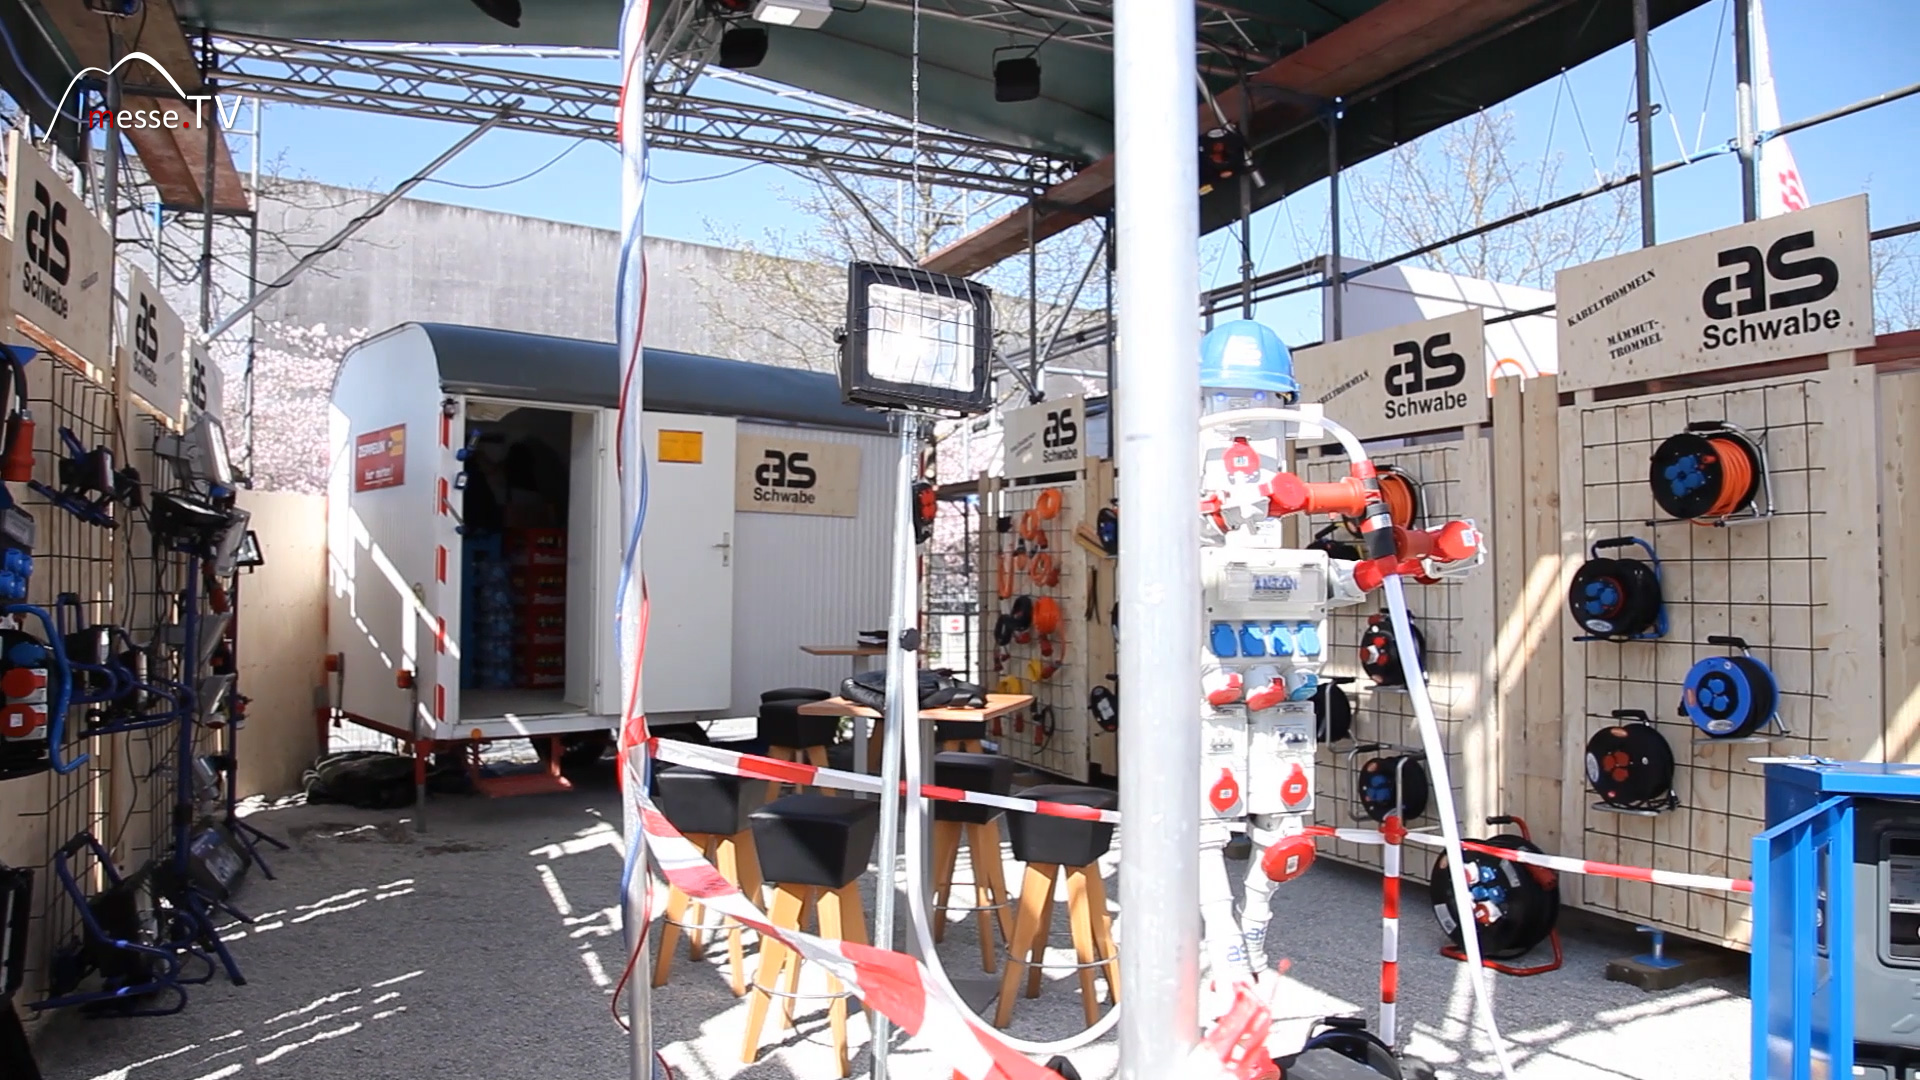 Trade fair appearance outdoor as Schwabe power supply construction site